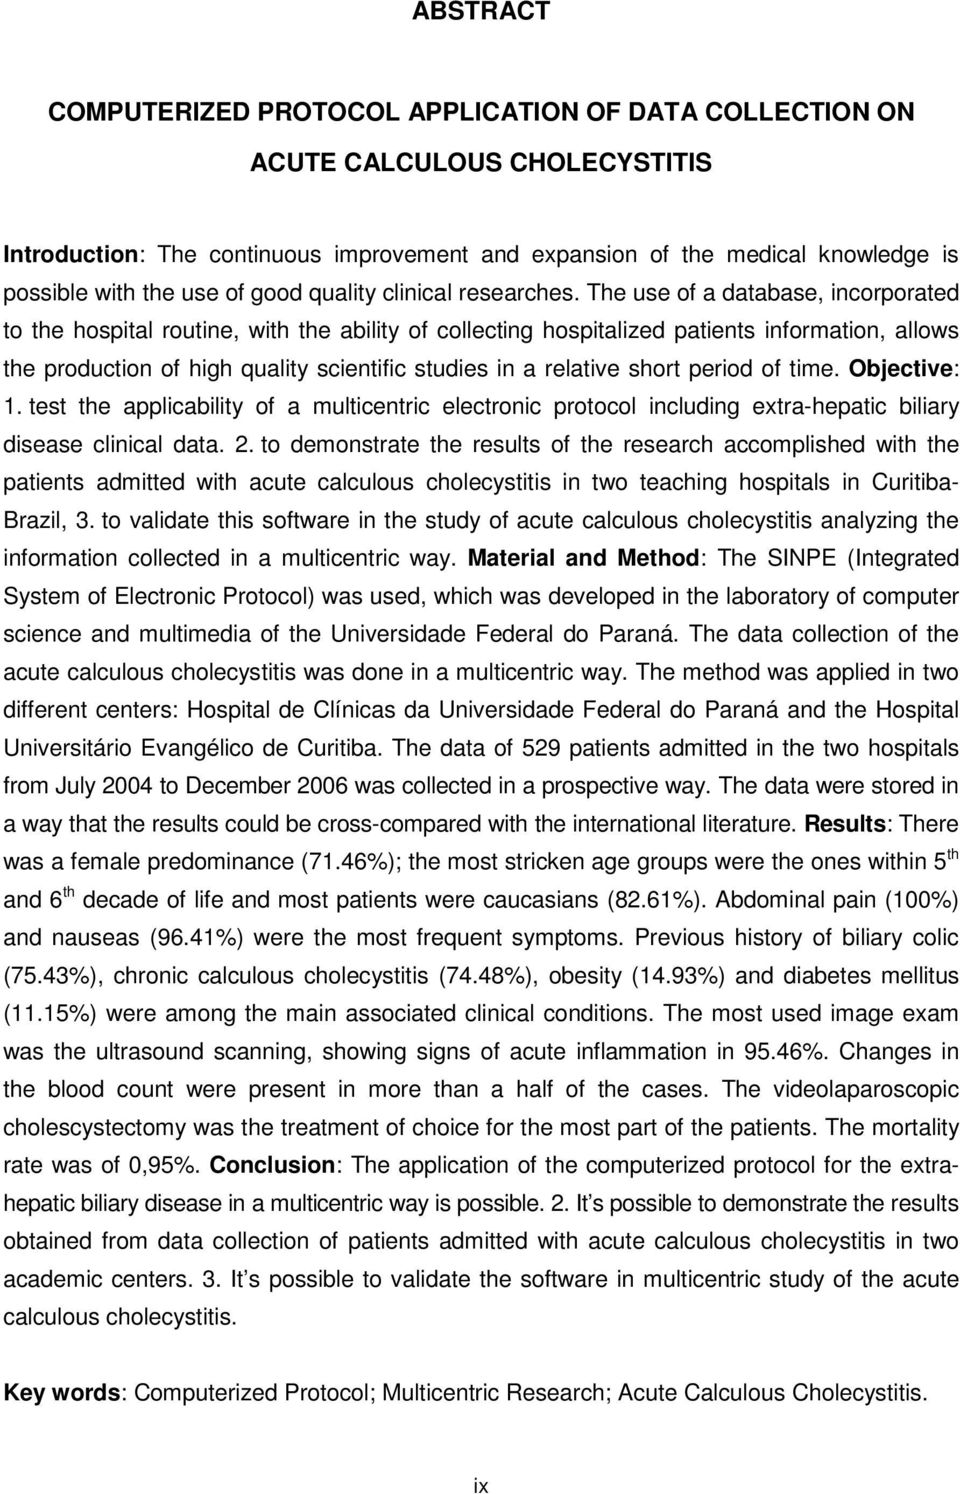 The use of a database, incorporated to the hospital routine, with the ability of collecting hospitalized patients information, allows the production of high quality scientific studies in a relative